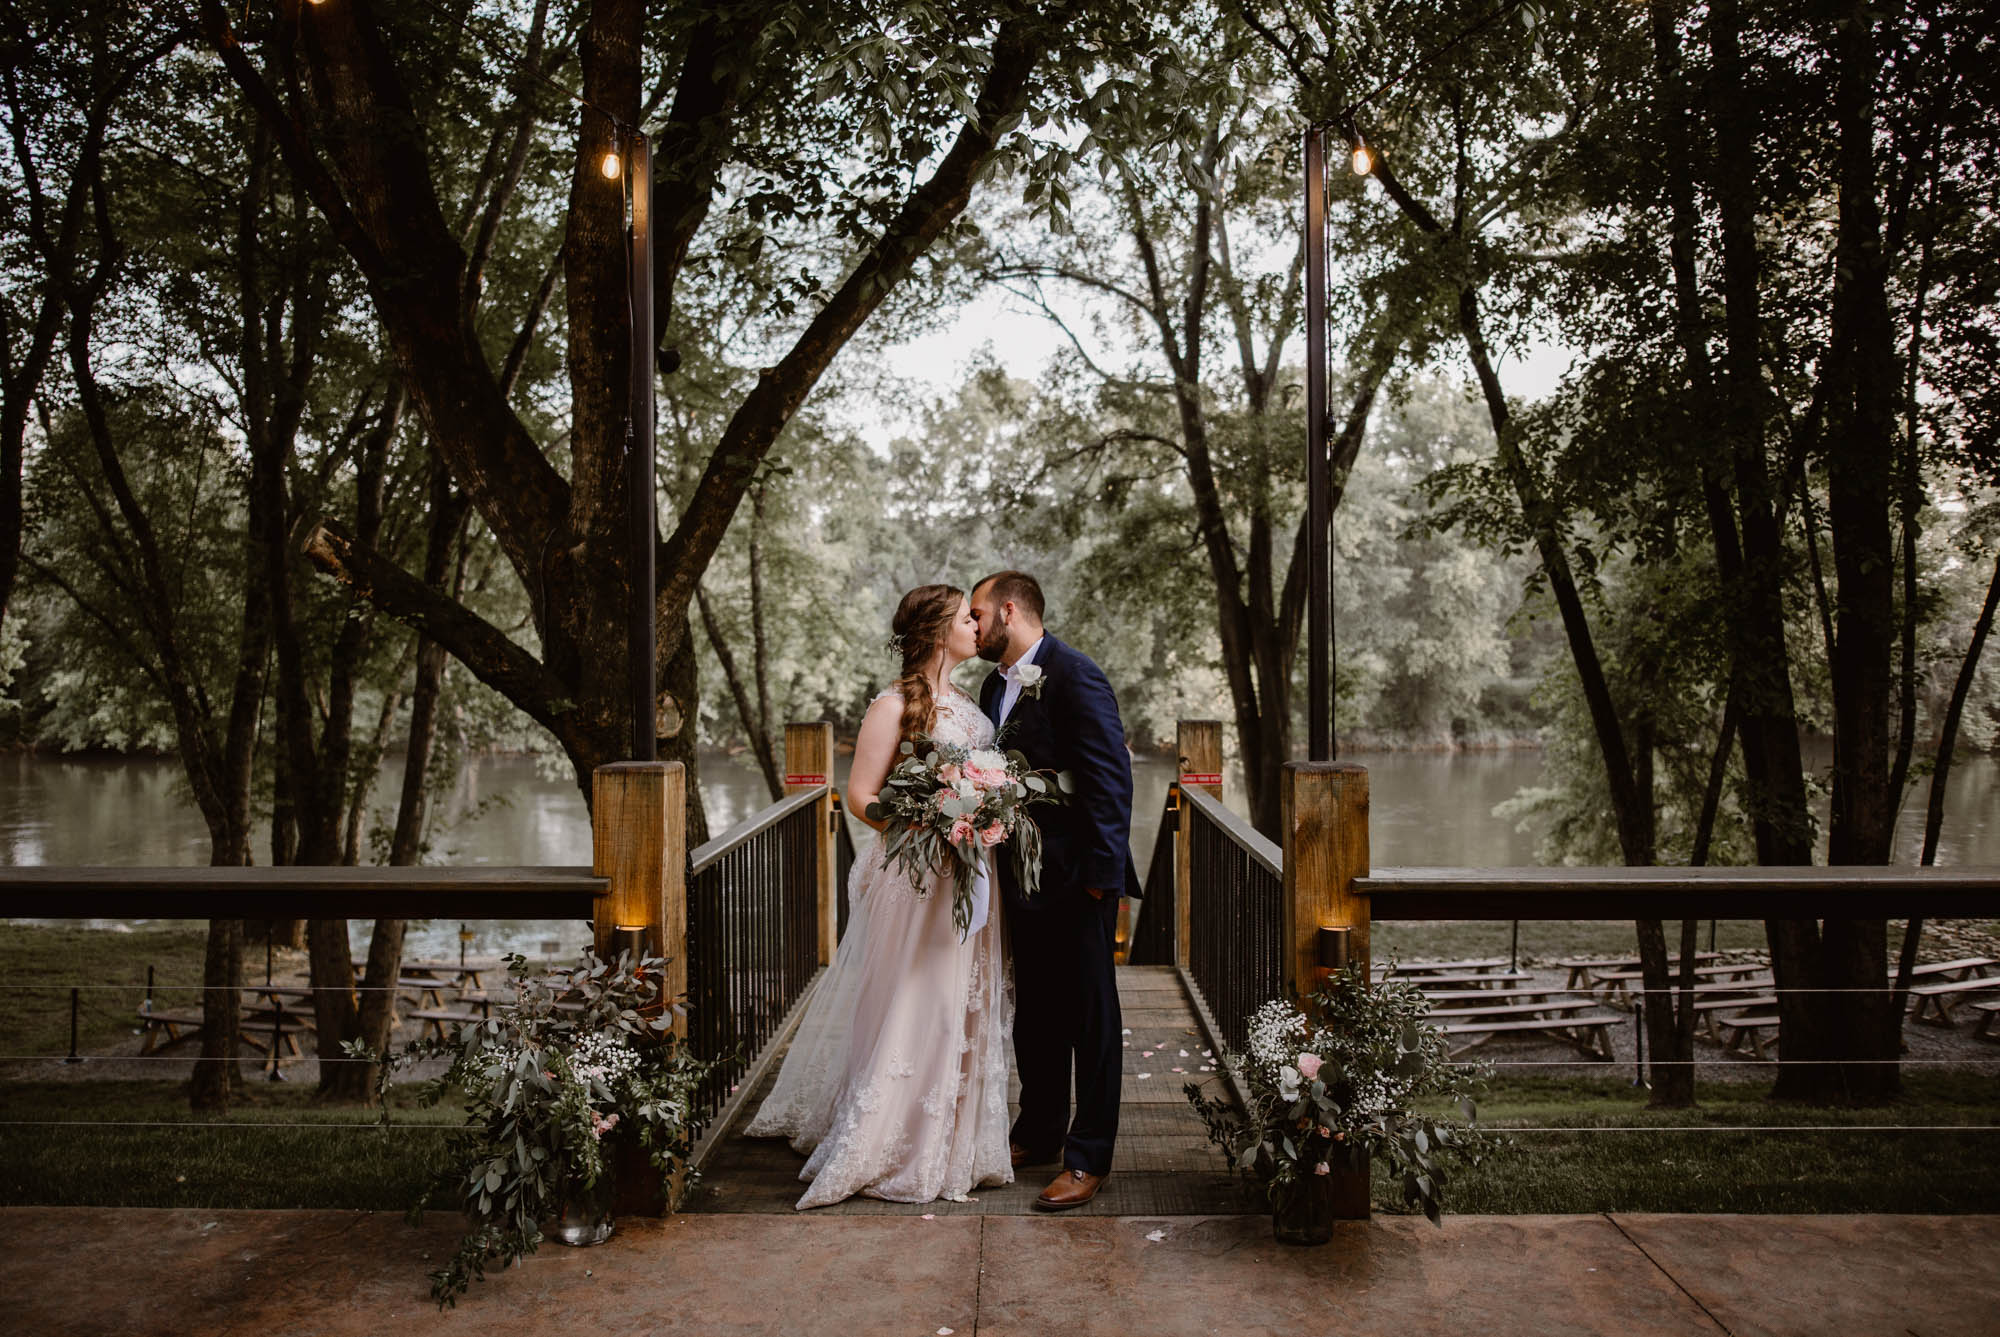 Hiwassee River Weddings in Delano, Tennessee